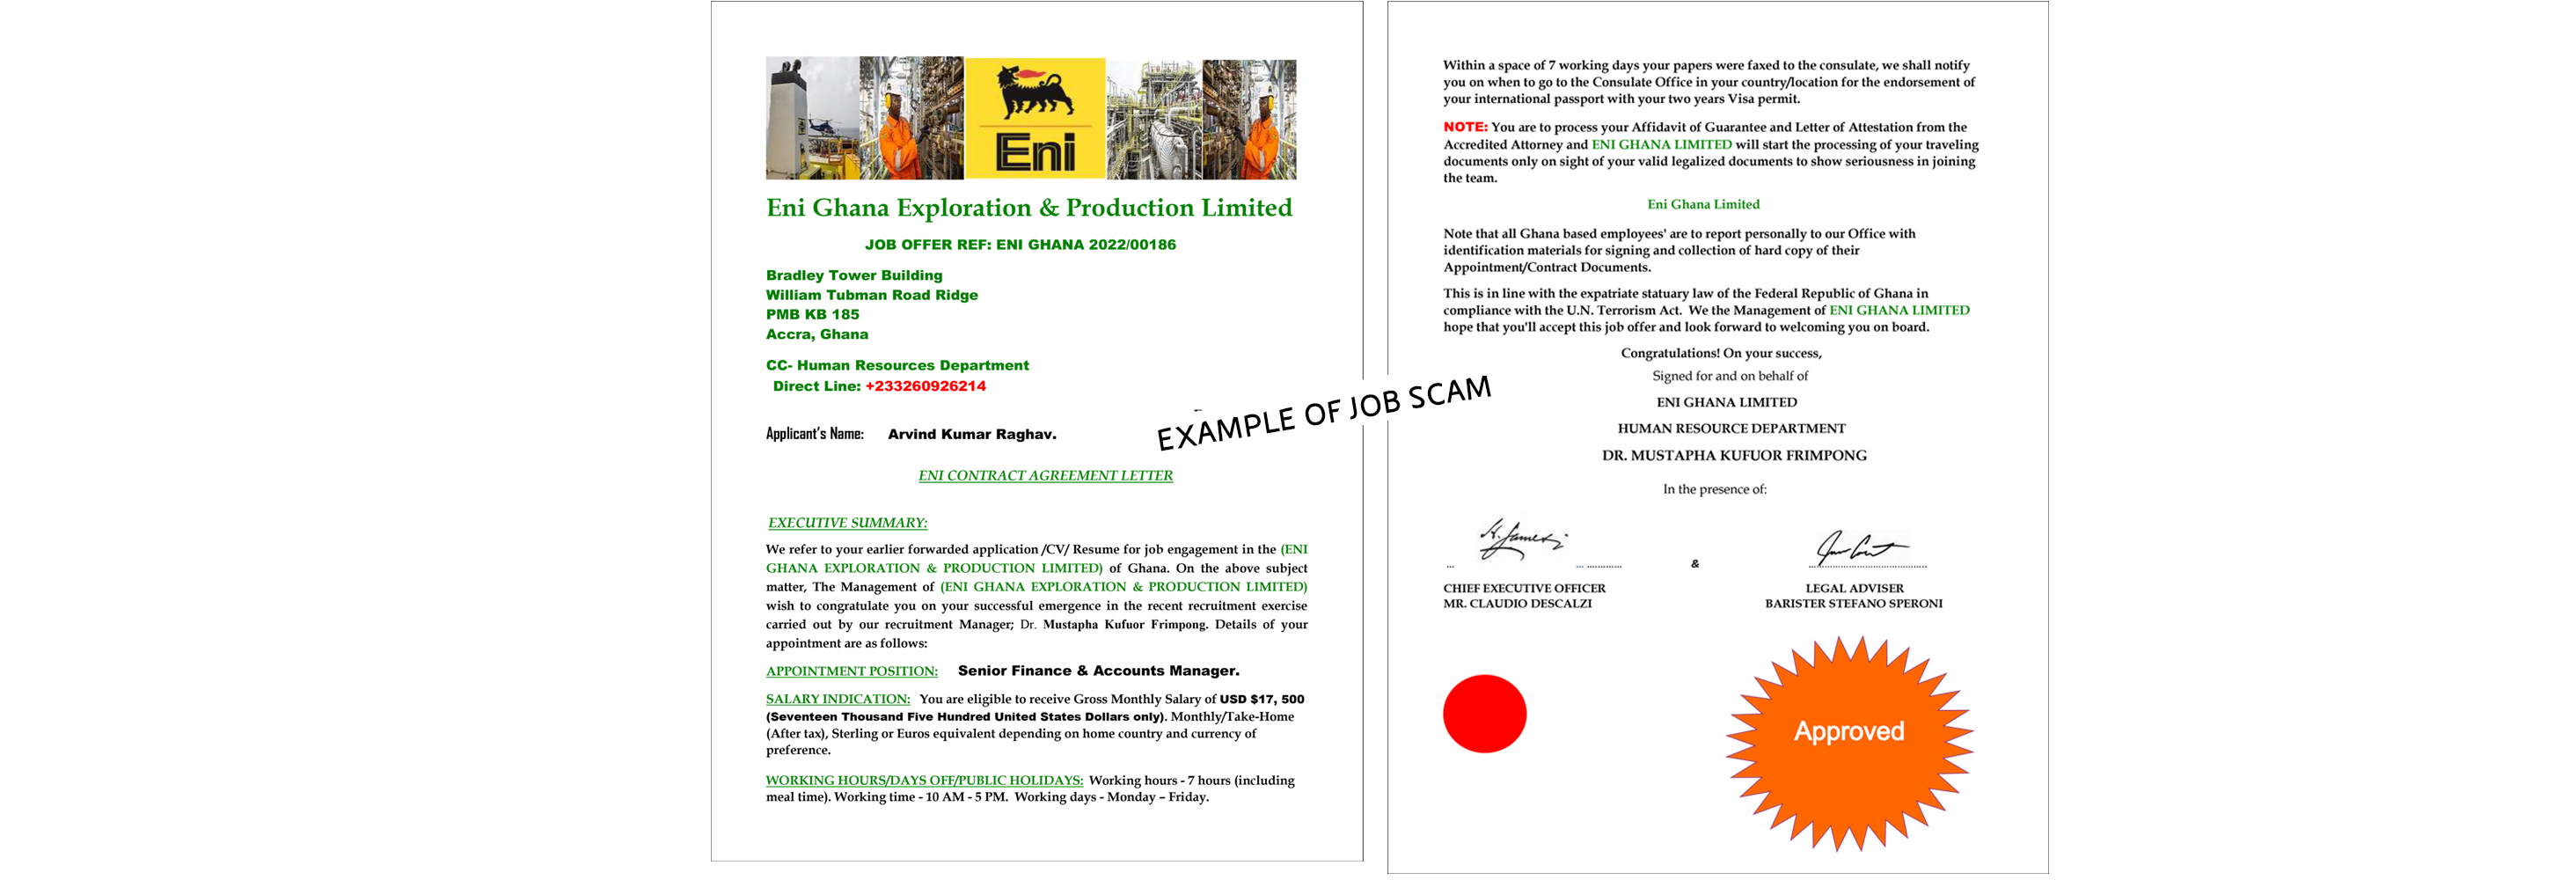 Scam and Phishing-Eni Contract Agreement-desk-eng.jpg